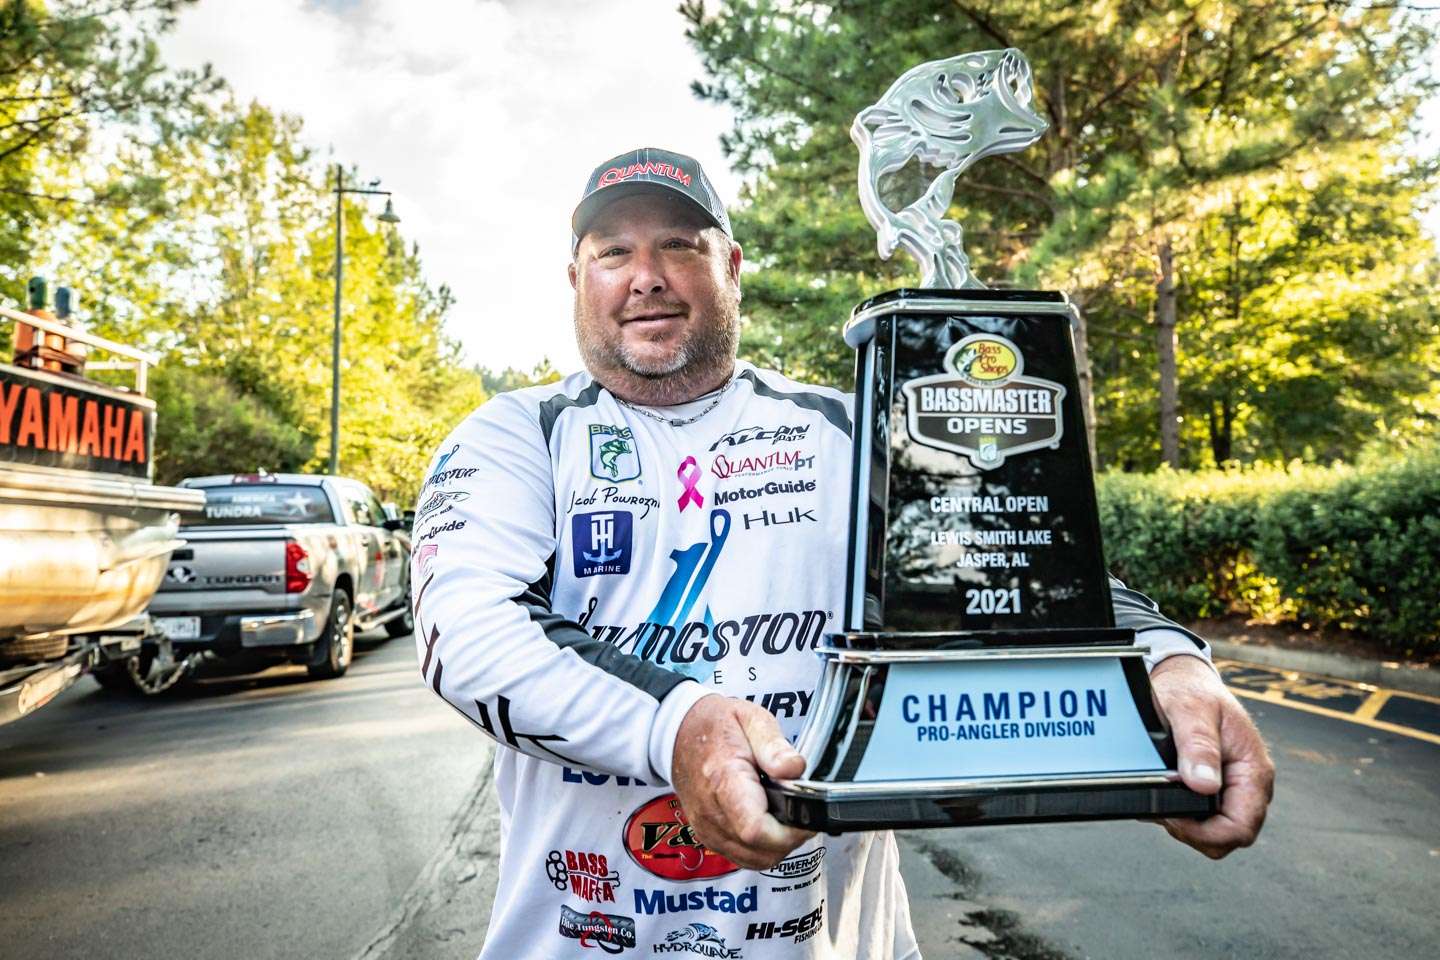 Check out all of the action from the Championship Saturday weigh-in of the Basspro.com Bassmaster Central Open at Smith Lake. 